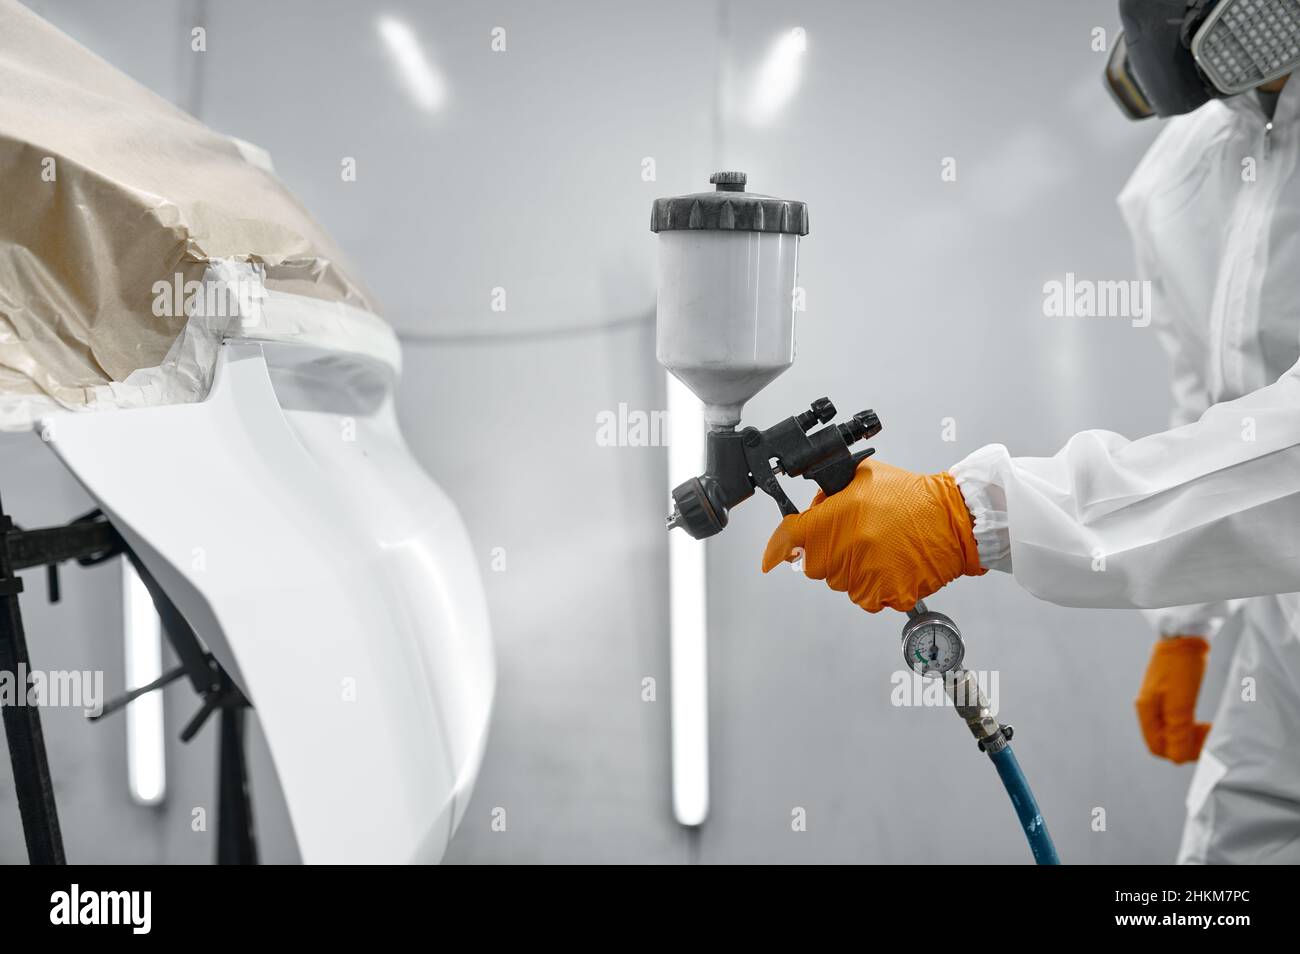 Technician in safety clothing spraying car paint Stock Photo